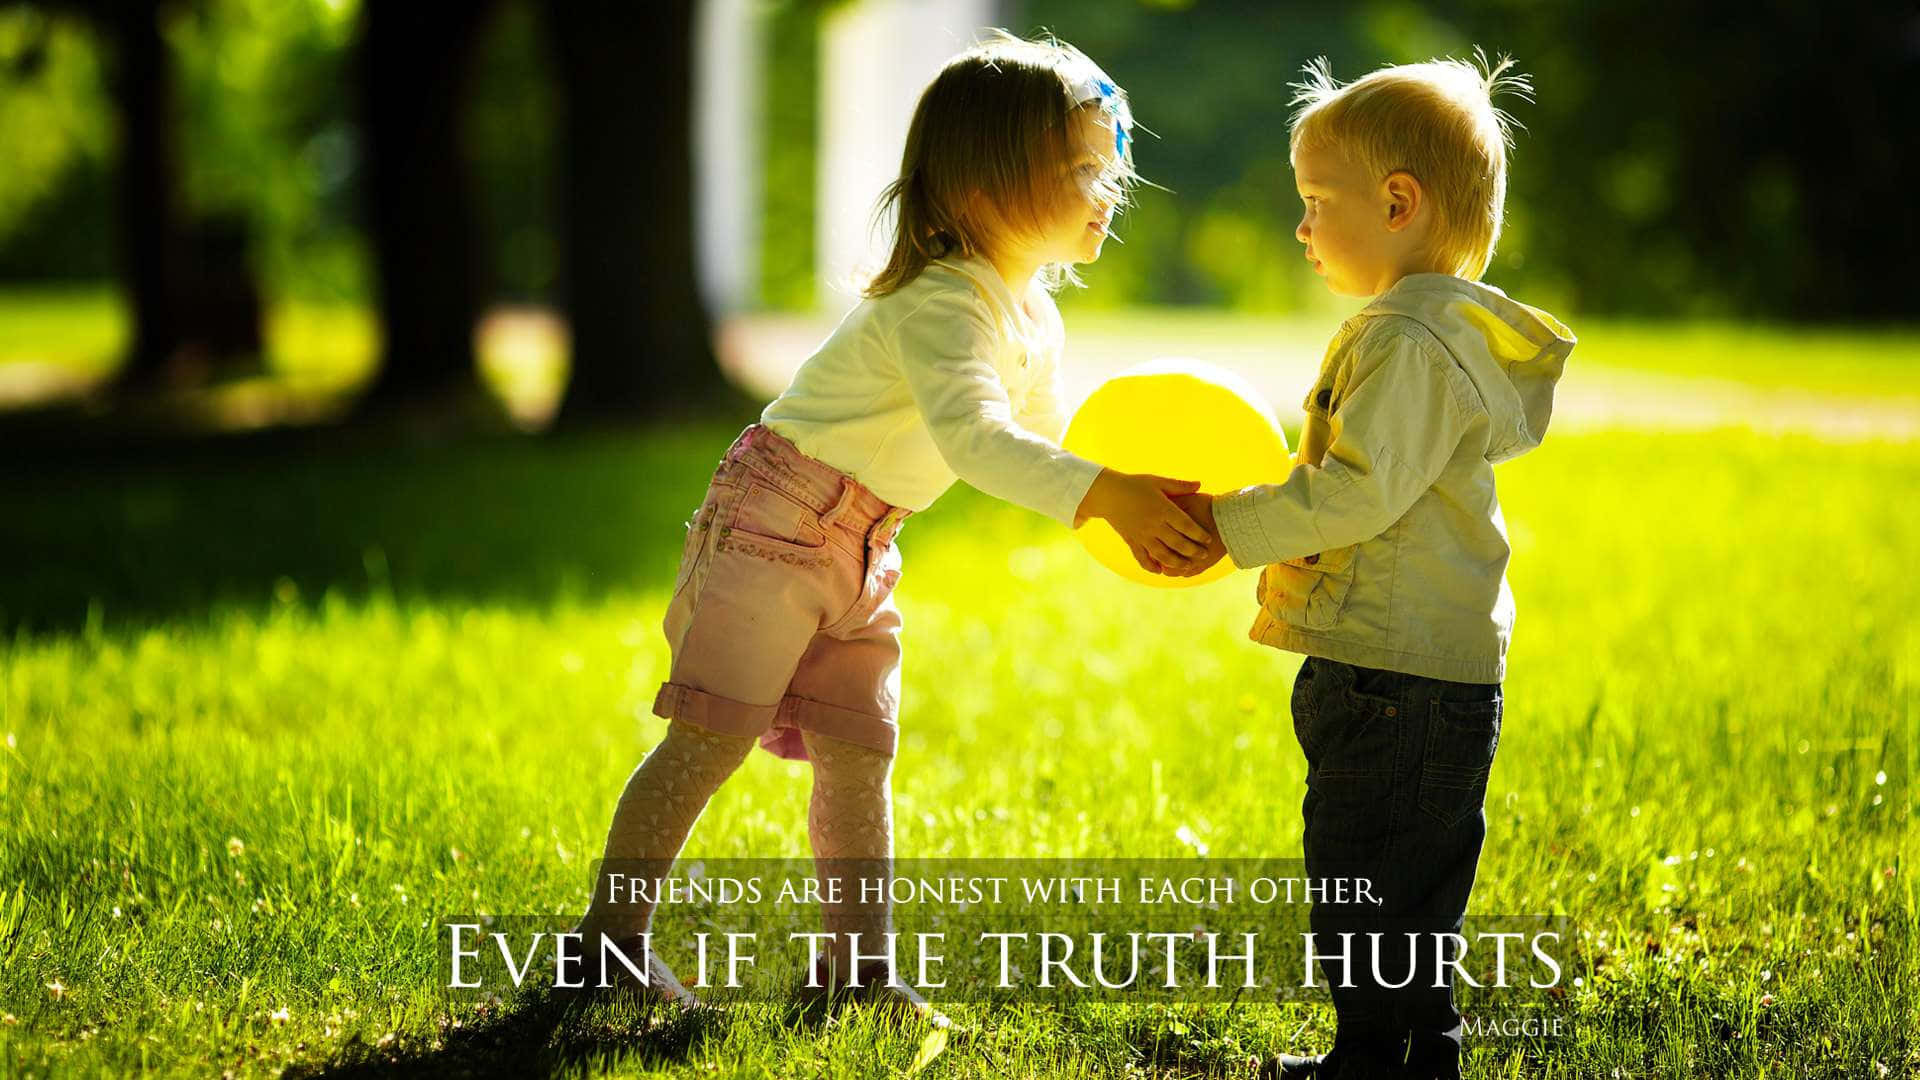 Friendship Quote Little Boy And Girl On Grass Picture